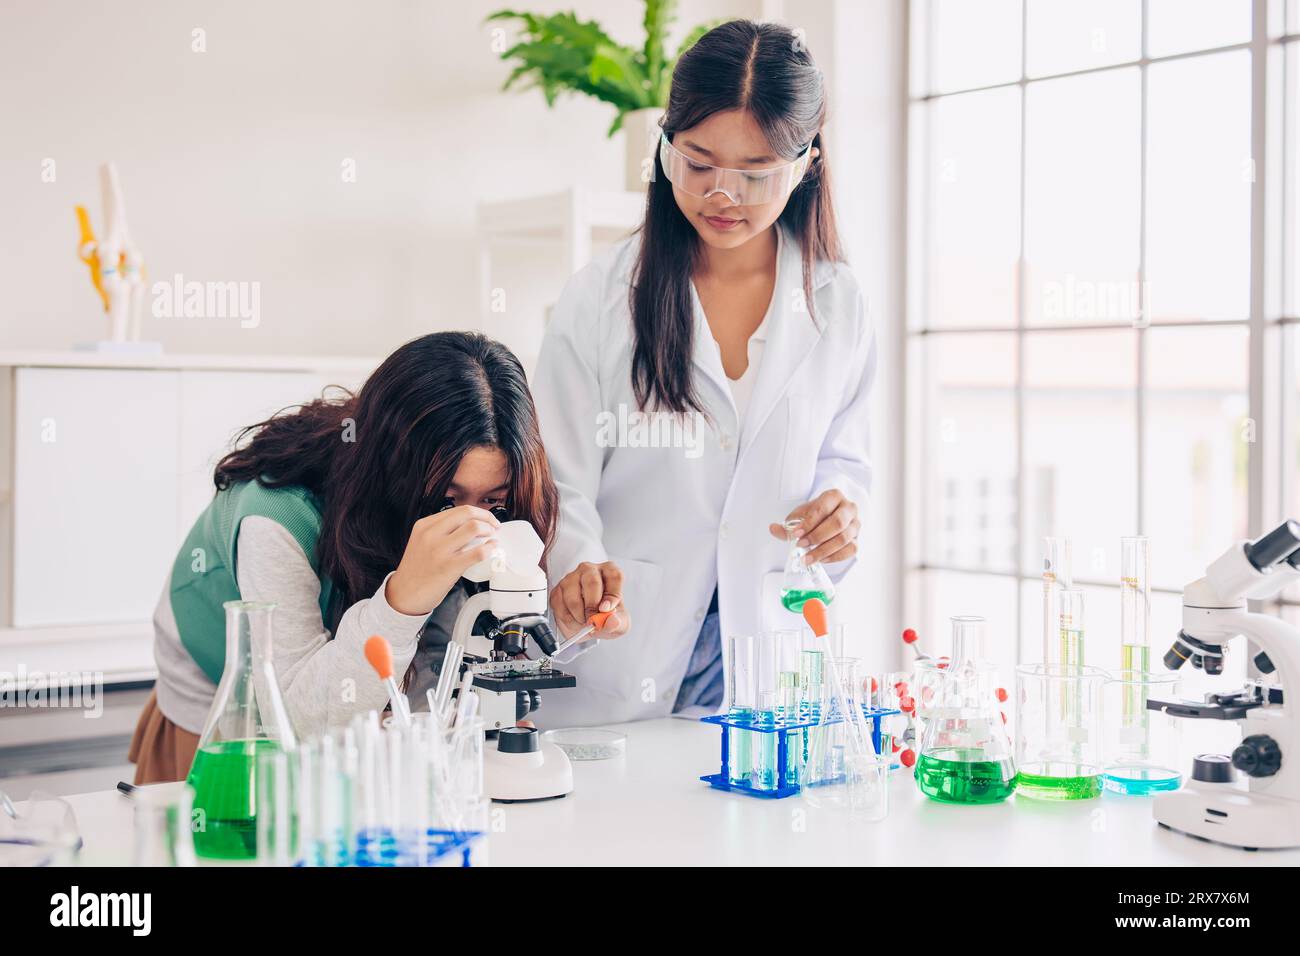 Children teen role playing scientist at fun science chemical lab workshop for learning education in school Stock Photo